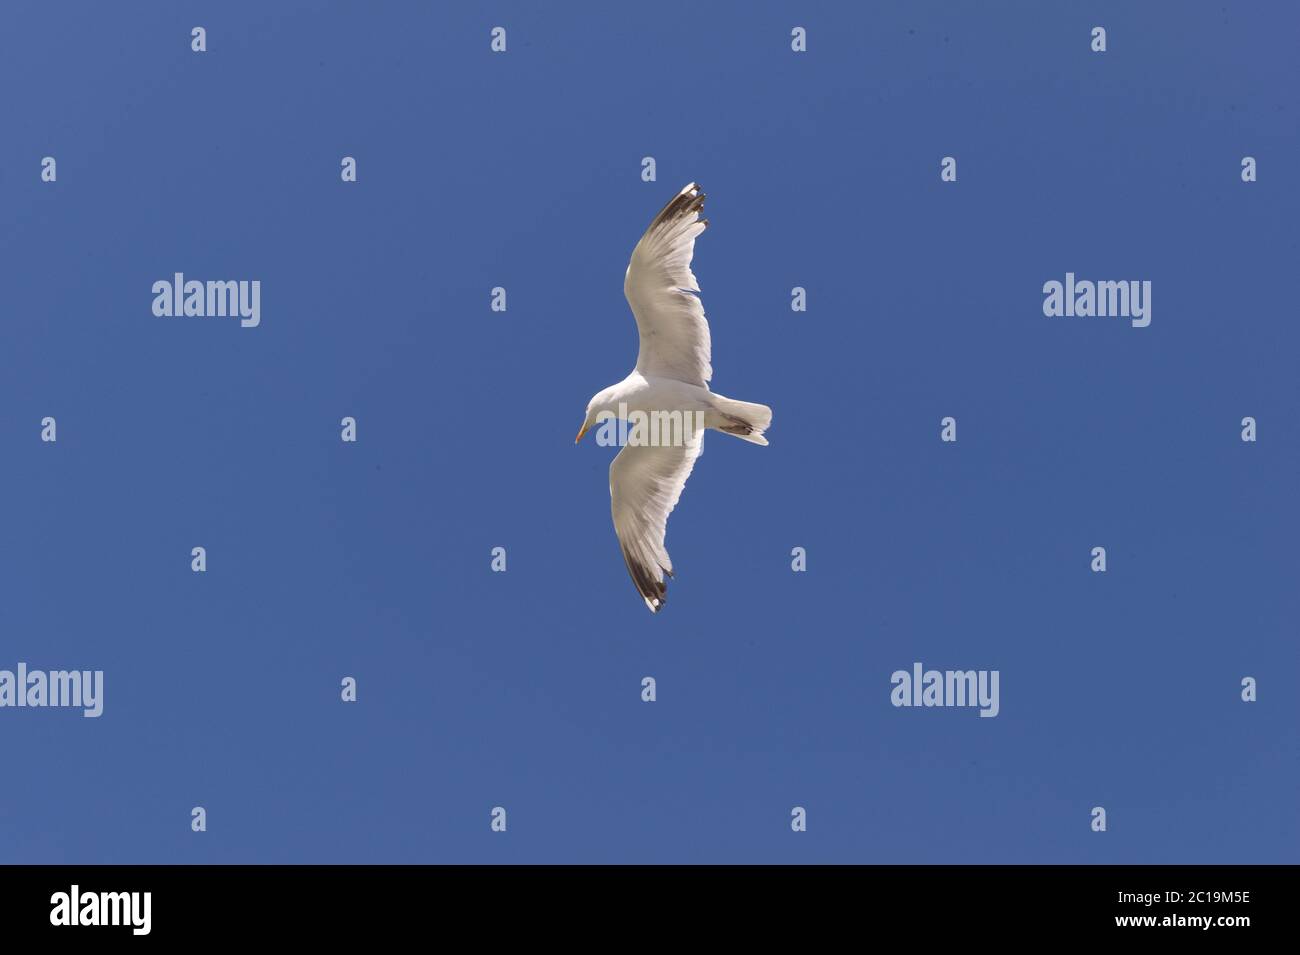 A lonely seagull is flying in the center of a blue sky Stock Photo